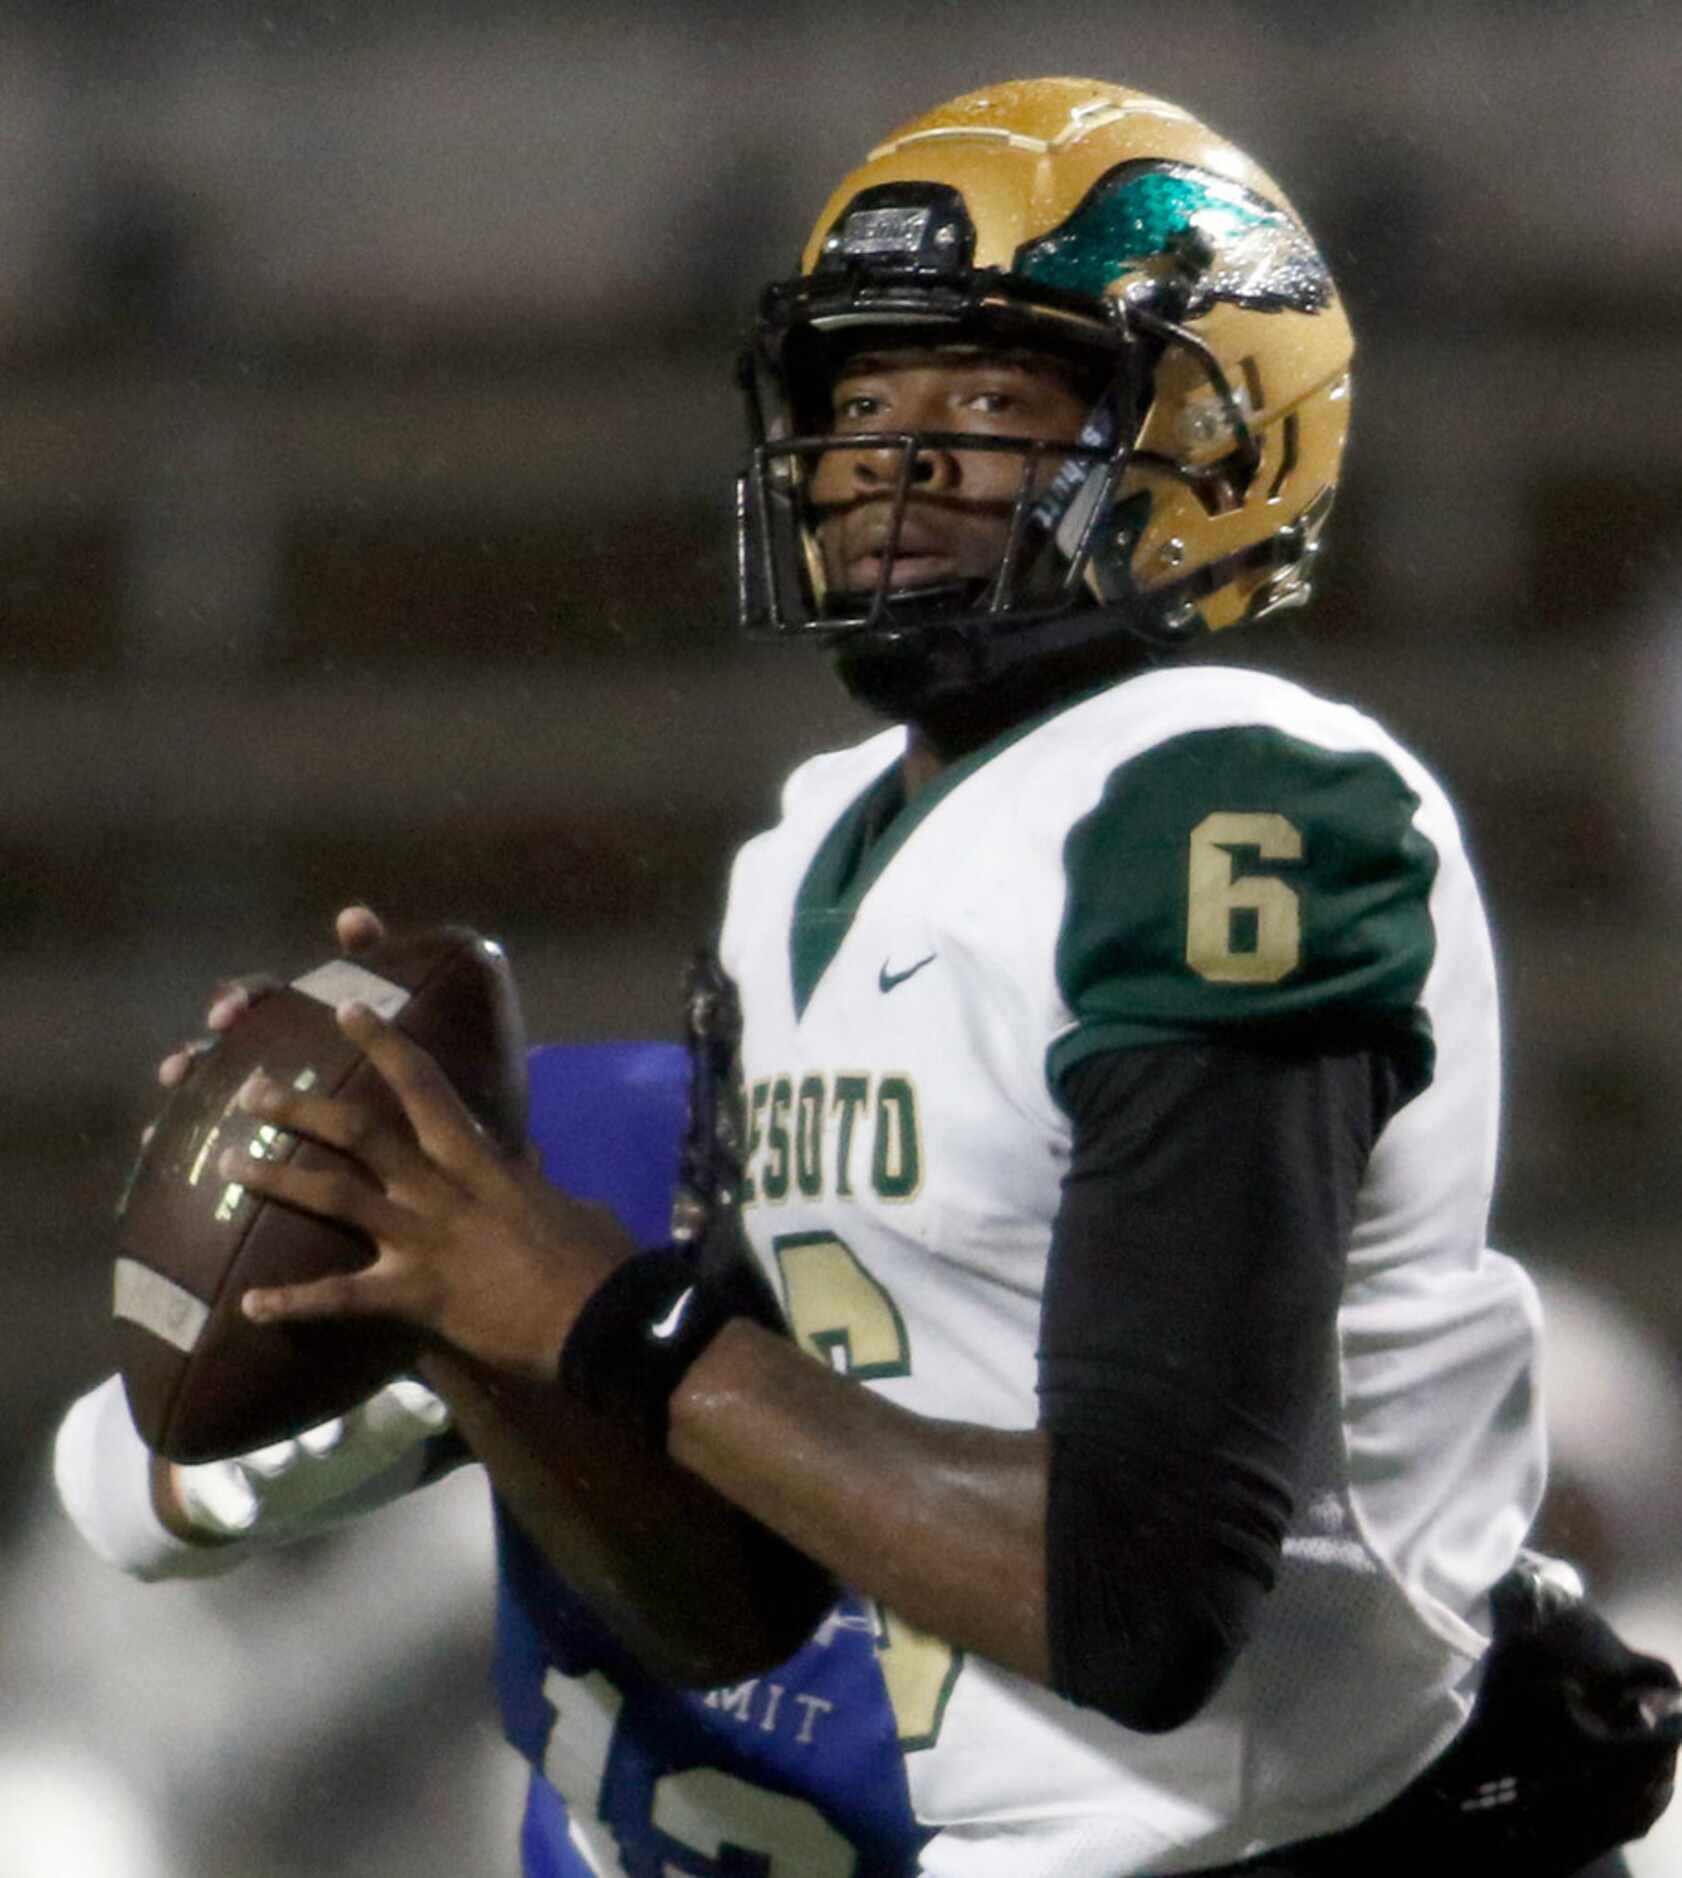 DeSoto quarterback Sami Collier (6) looks for a receiver during first half action against...